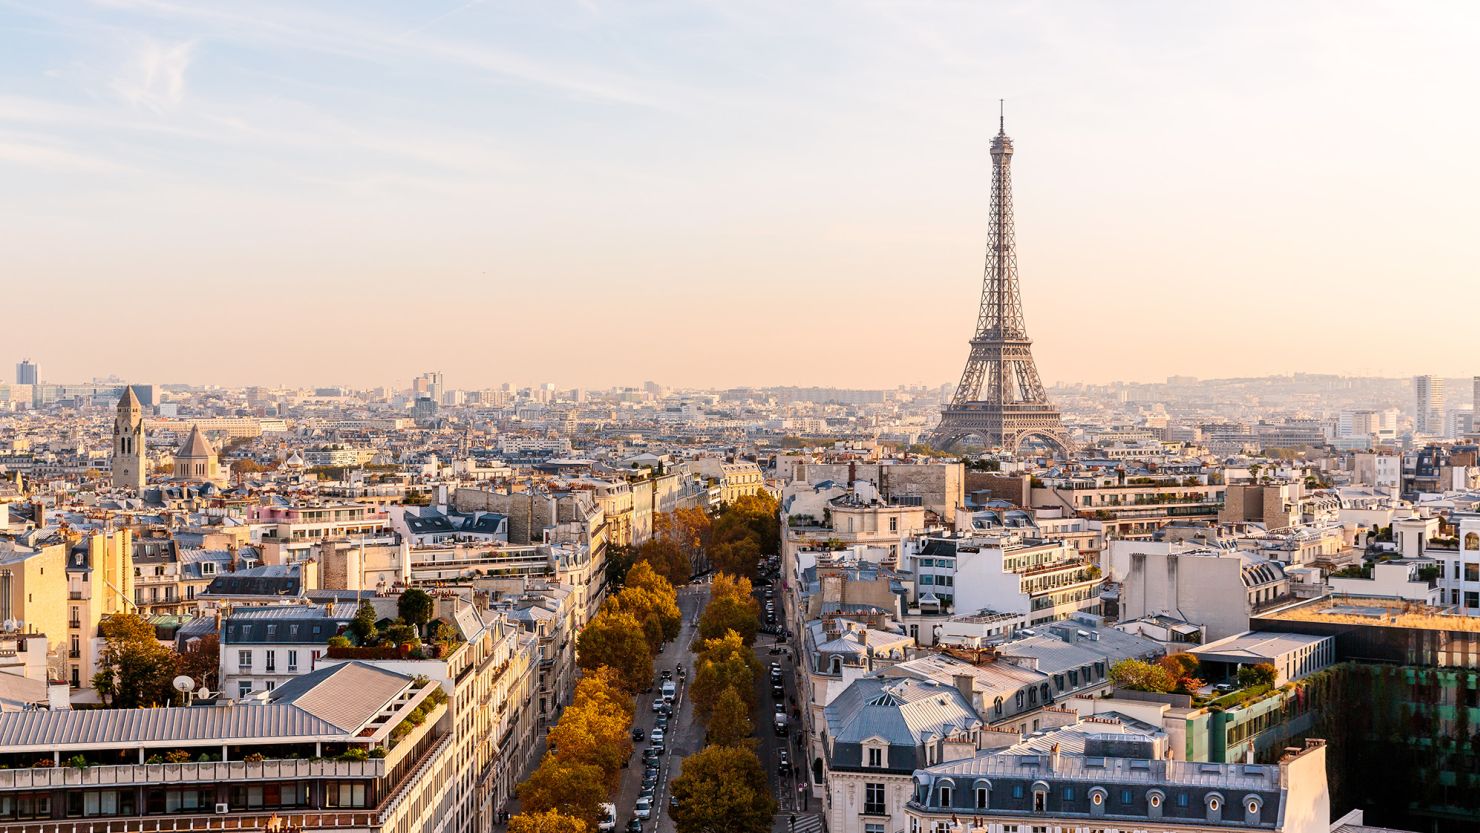 Stay in Paris and you'll pay up to $5.50 per person per night in city tax.